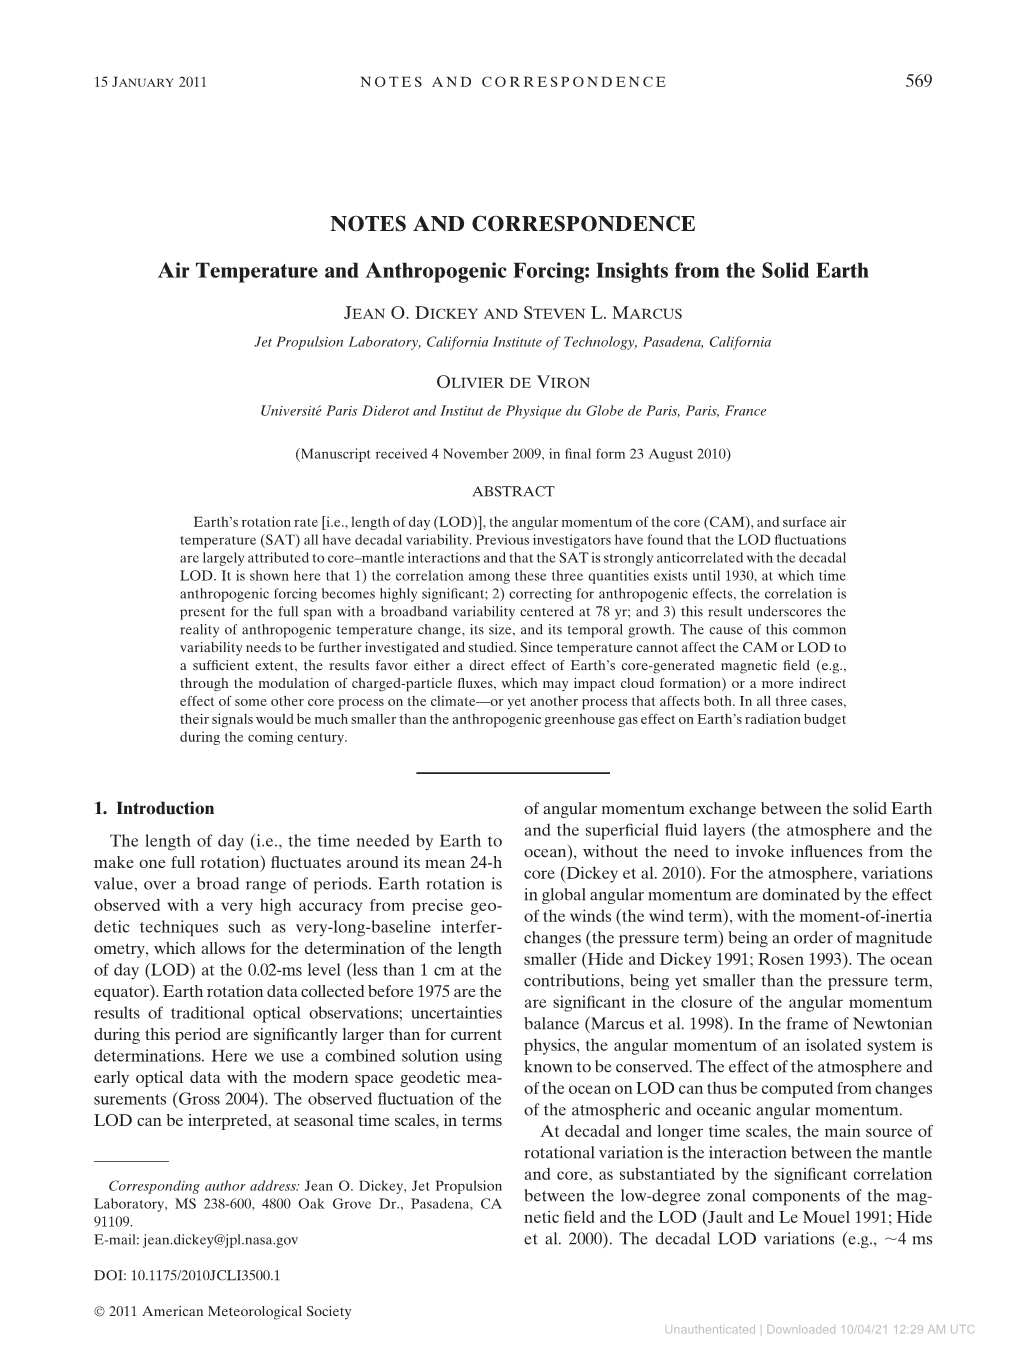 NOTES and CORRESPONDENCE Air Temperature and Anthropogenic